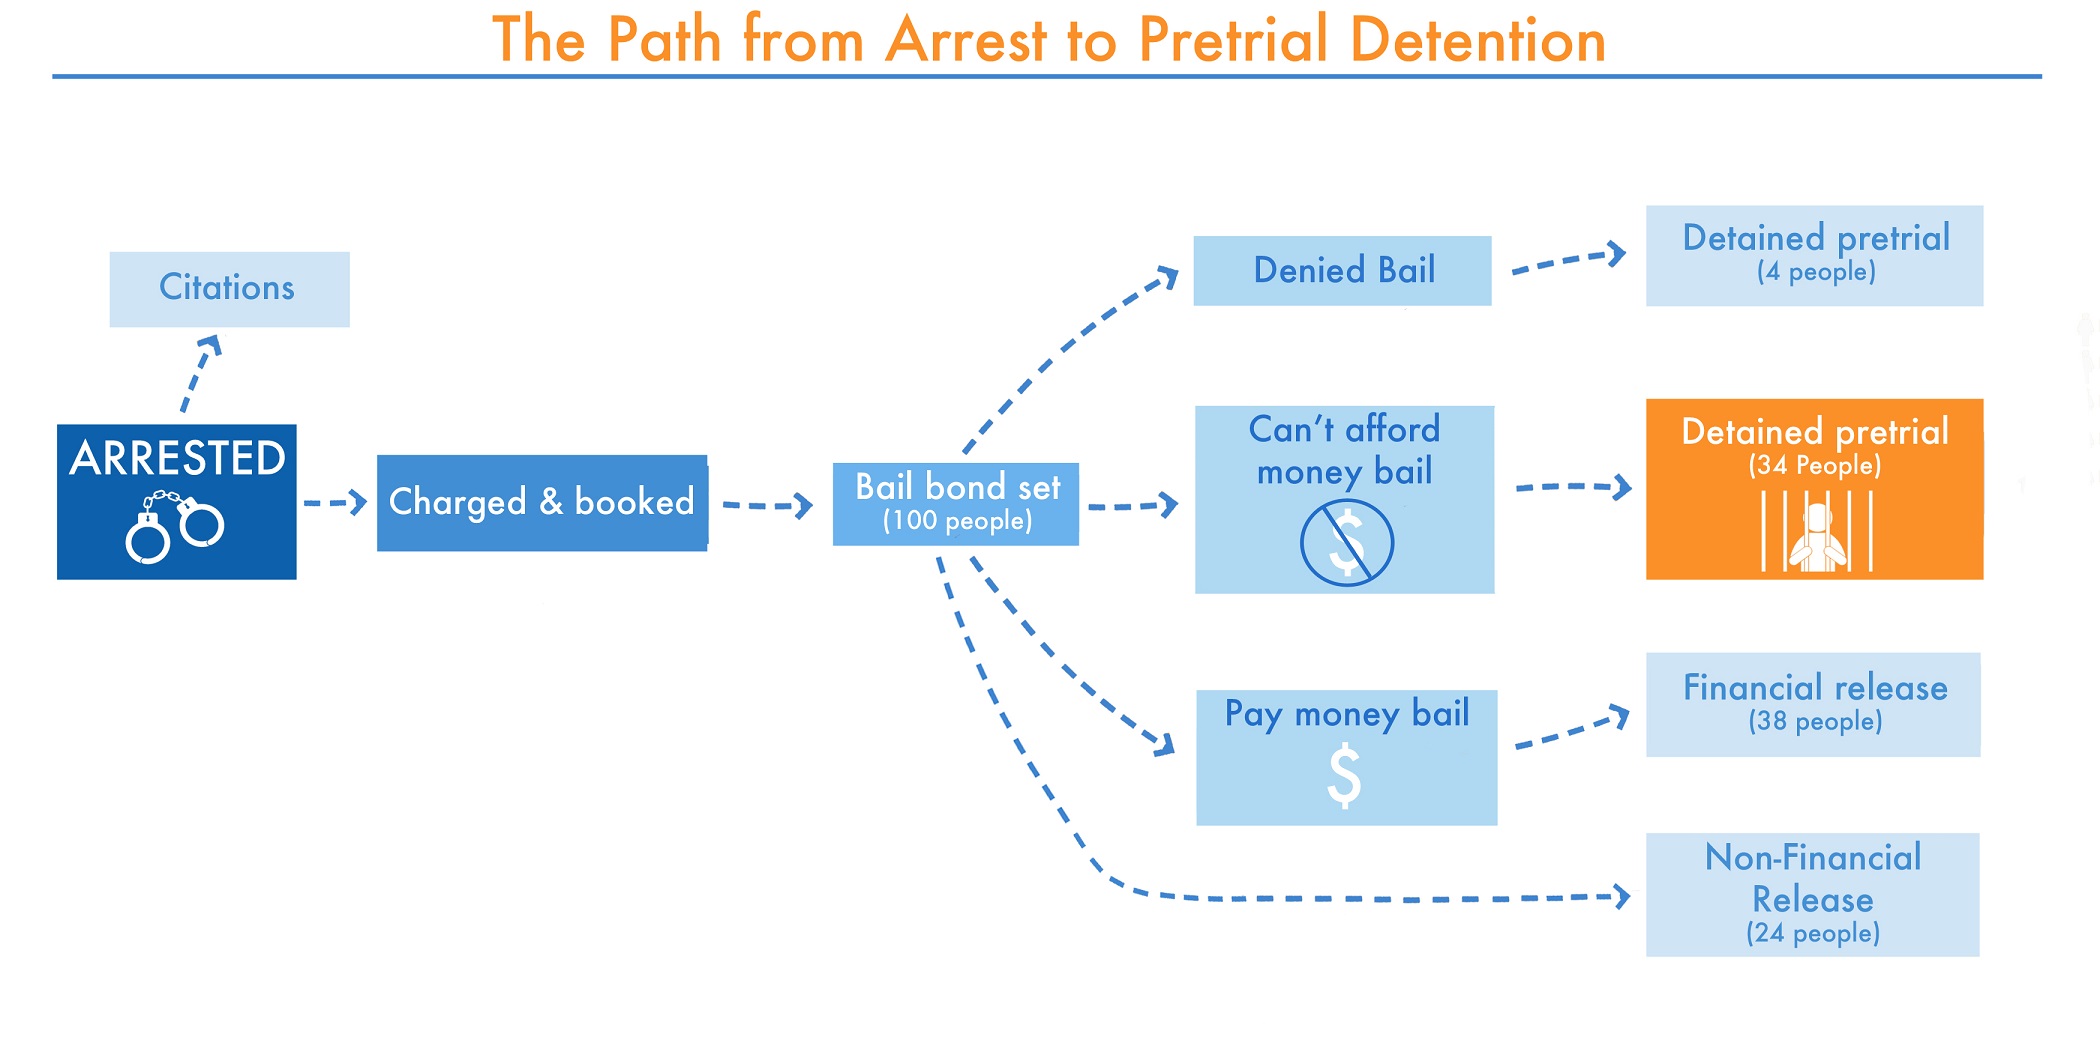 Are All Defendants Eligible for Bail?